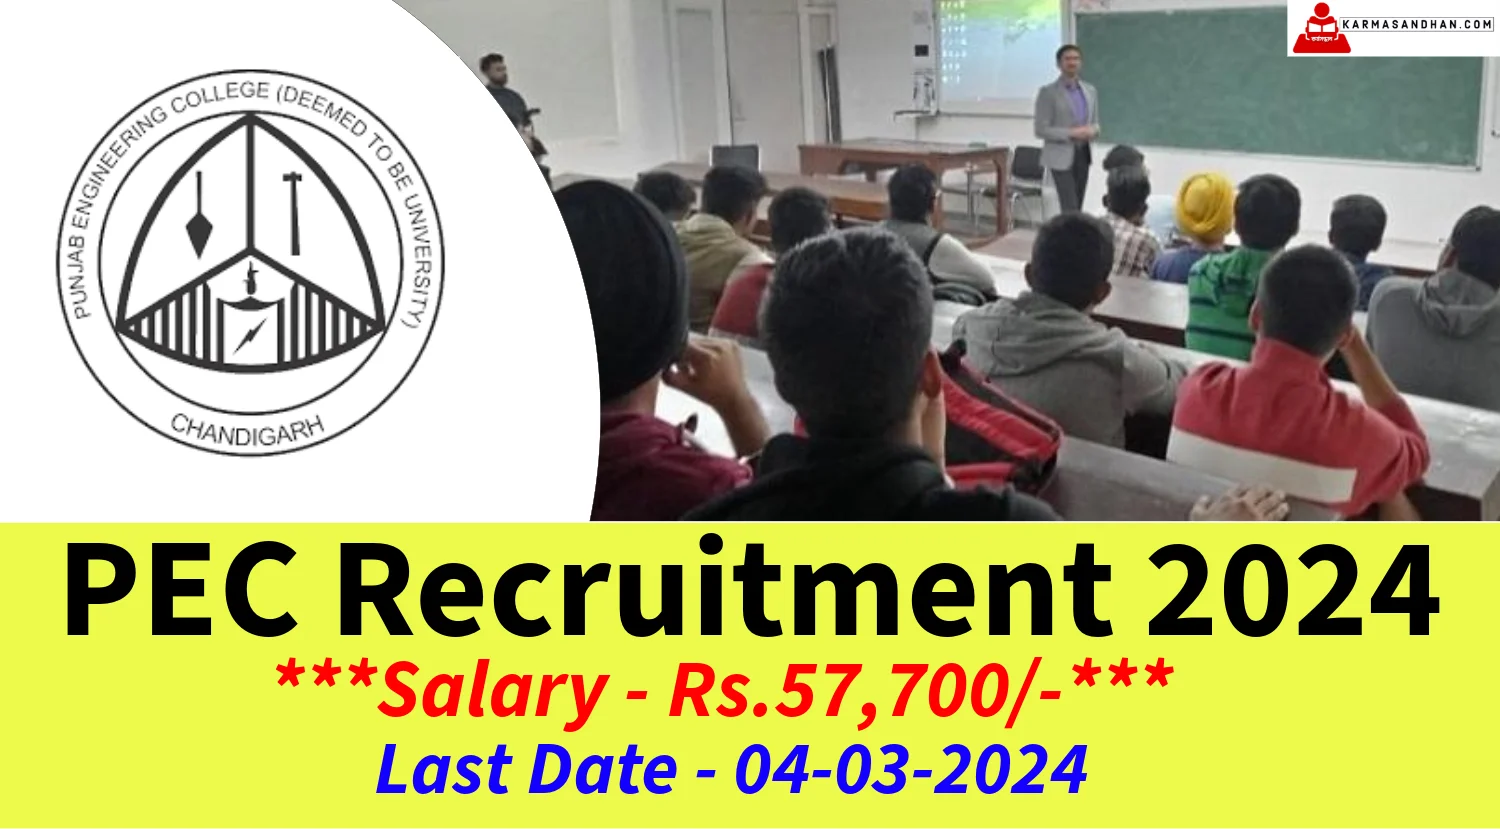 PEC Recruitment 2024 Notification out for Faculty Posts